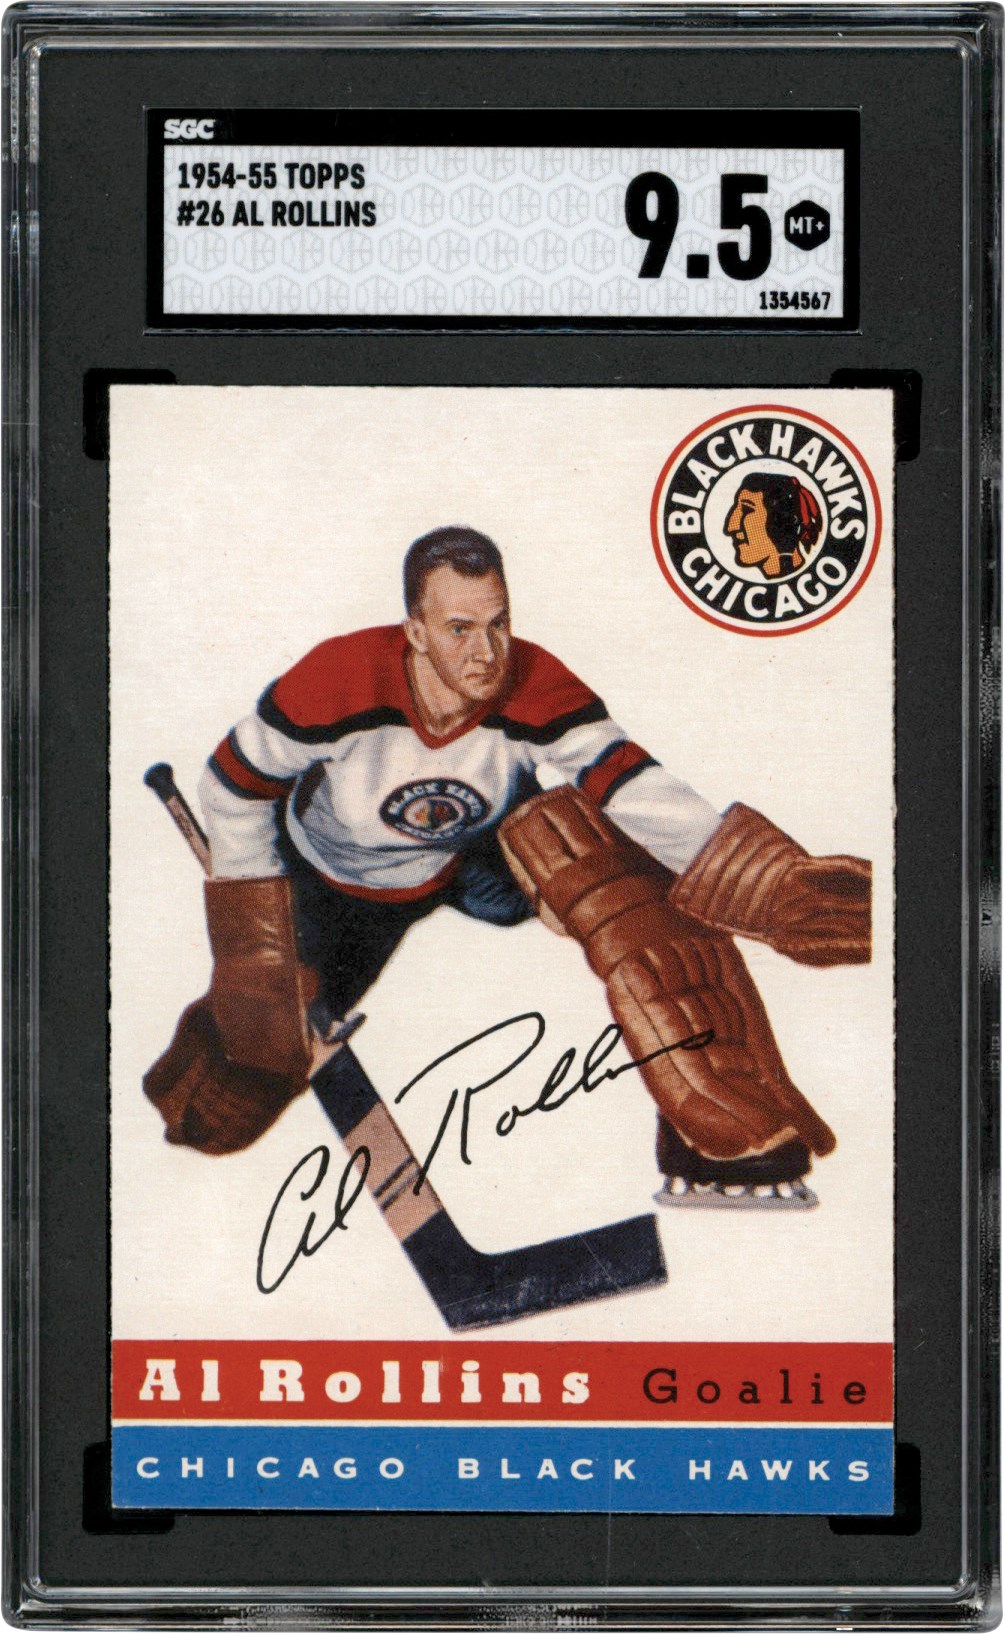 Hockey Cards - 1954-1955 Topps Hockey #20 Al Rollins SGC MINT+ 9.5 (Finest Known Example)